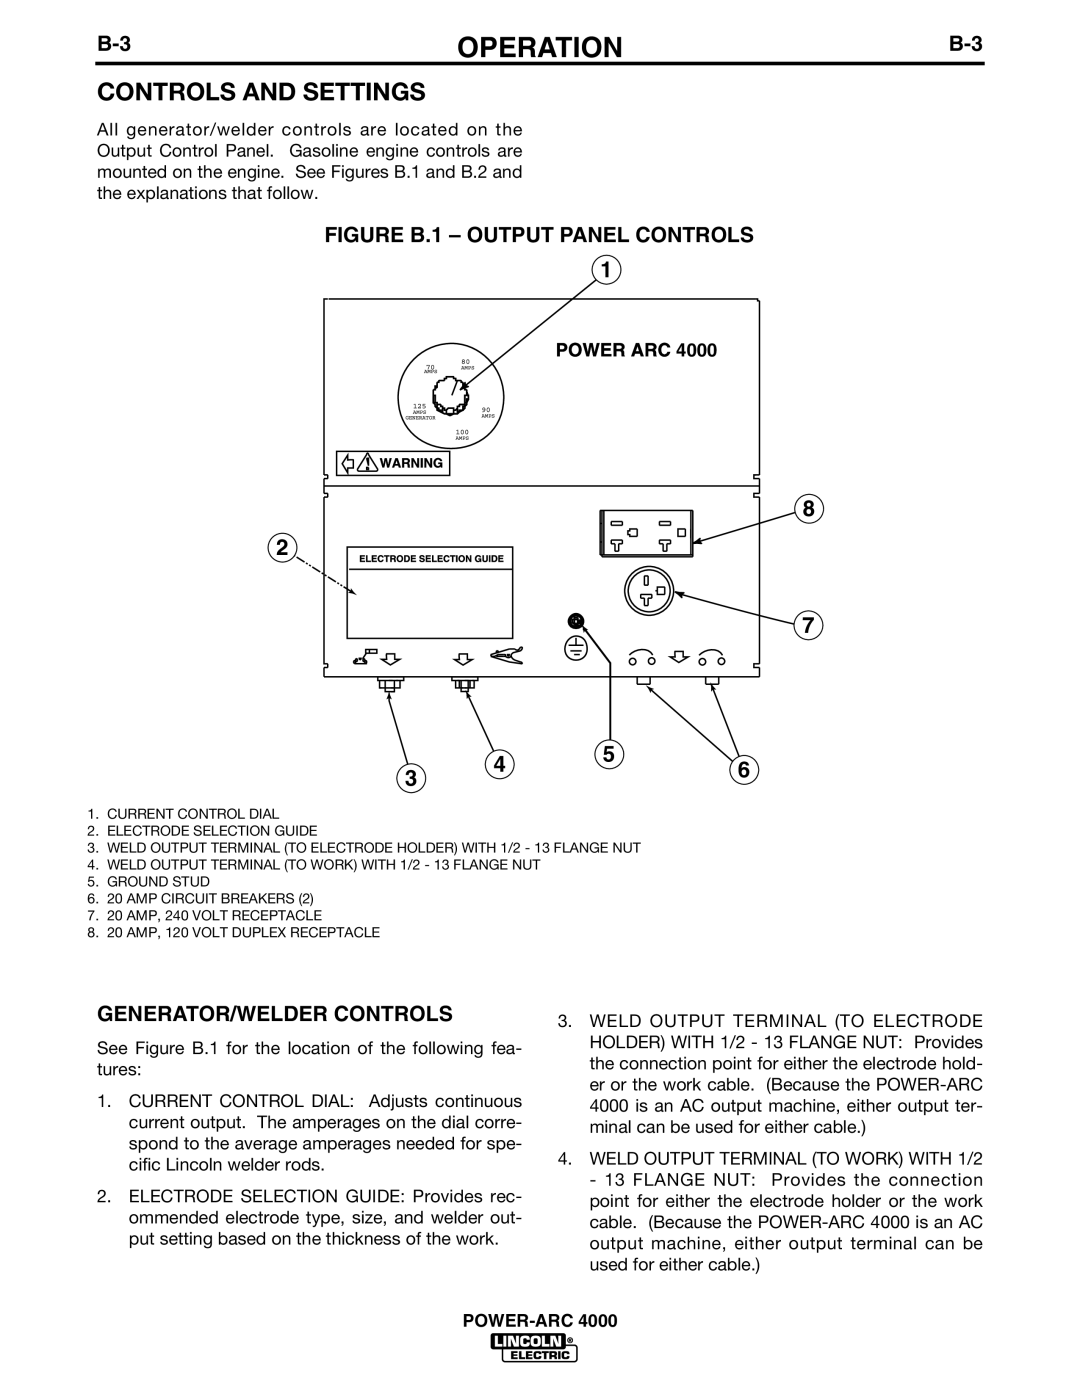 Lincoln POWER-ARC 4000 Controls And Settings, FIGURE B.1 - OUTPUT PANEL CONTROLS, Generator/Welder Controls, Operation 